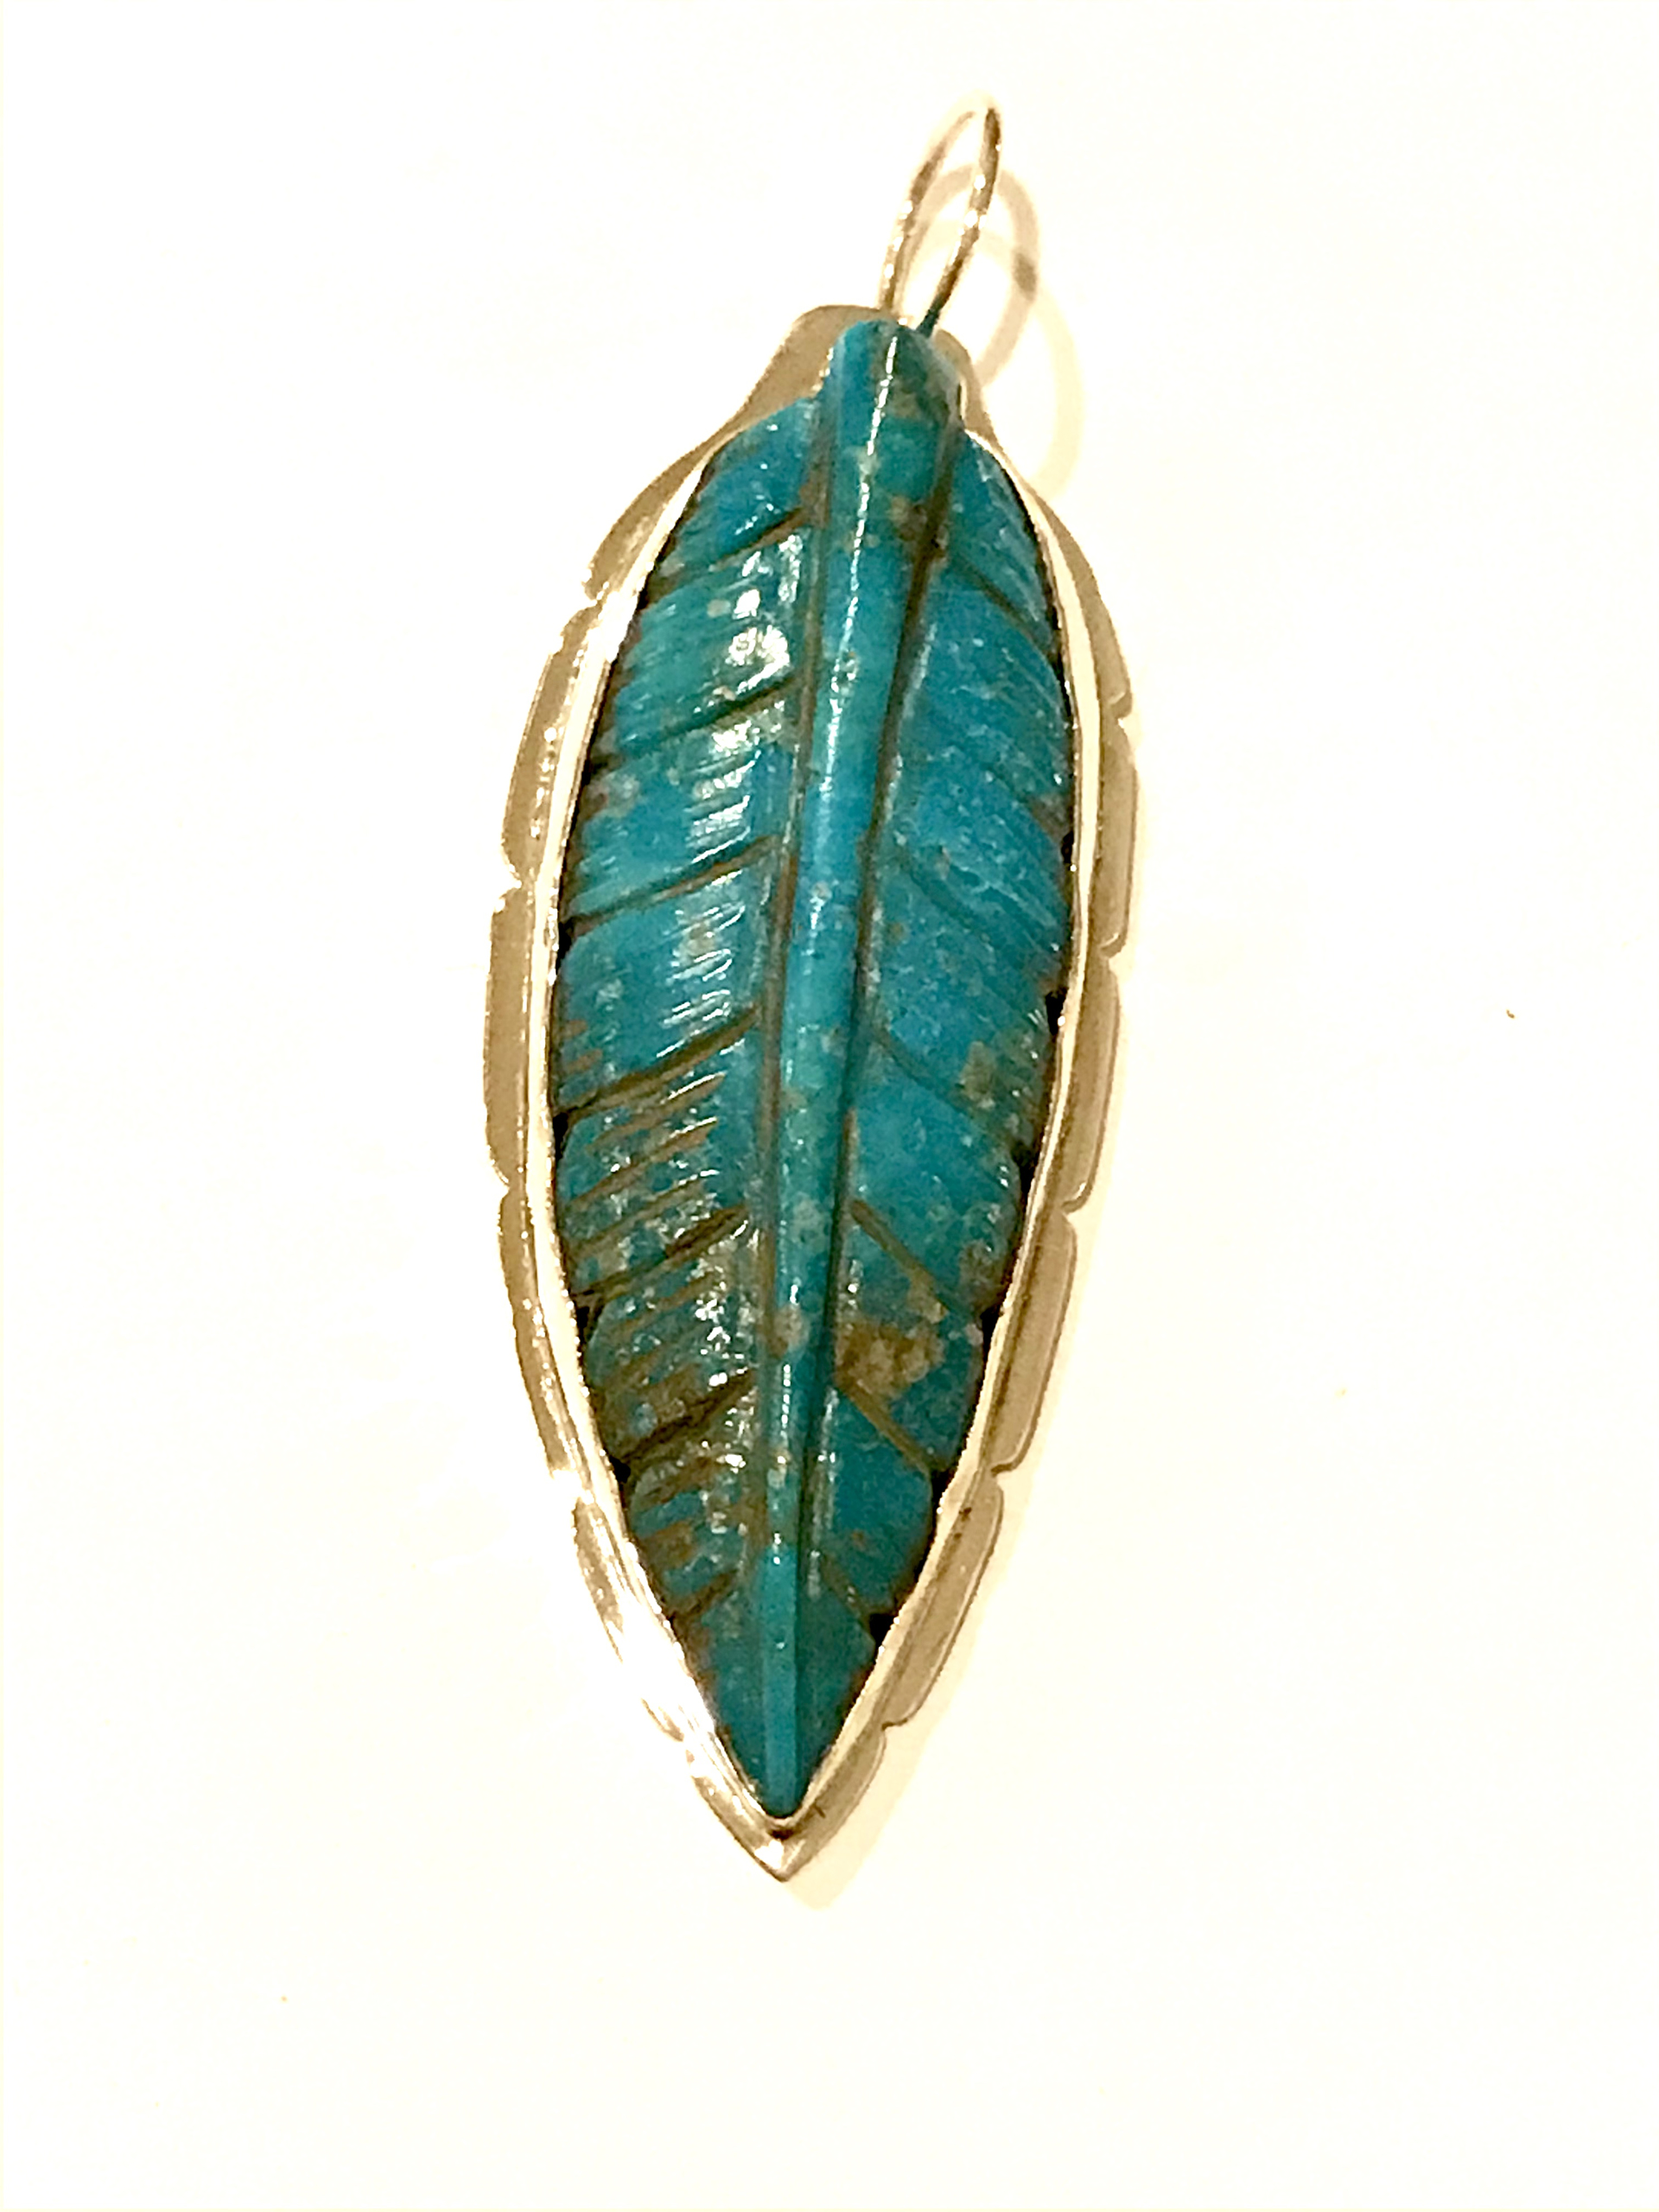 Pendant - Large Turquoise Feather by Dan Dodson